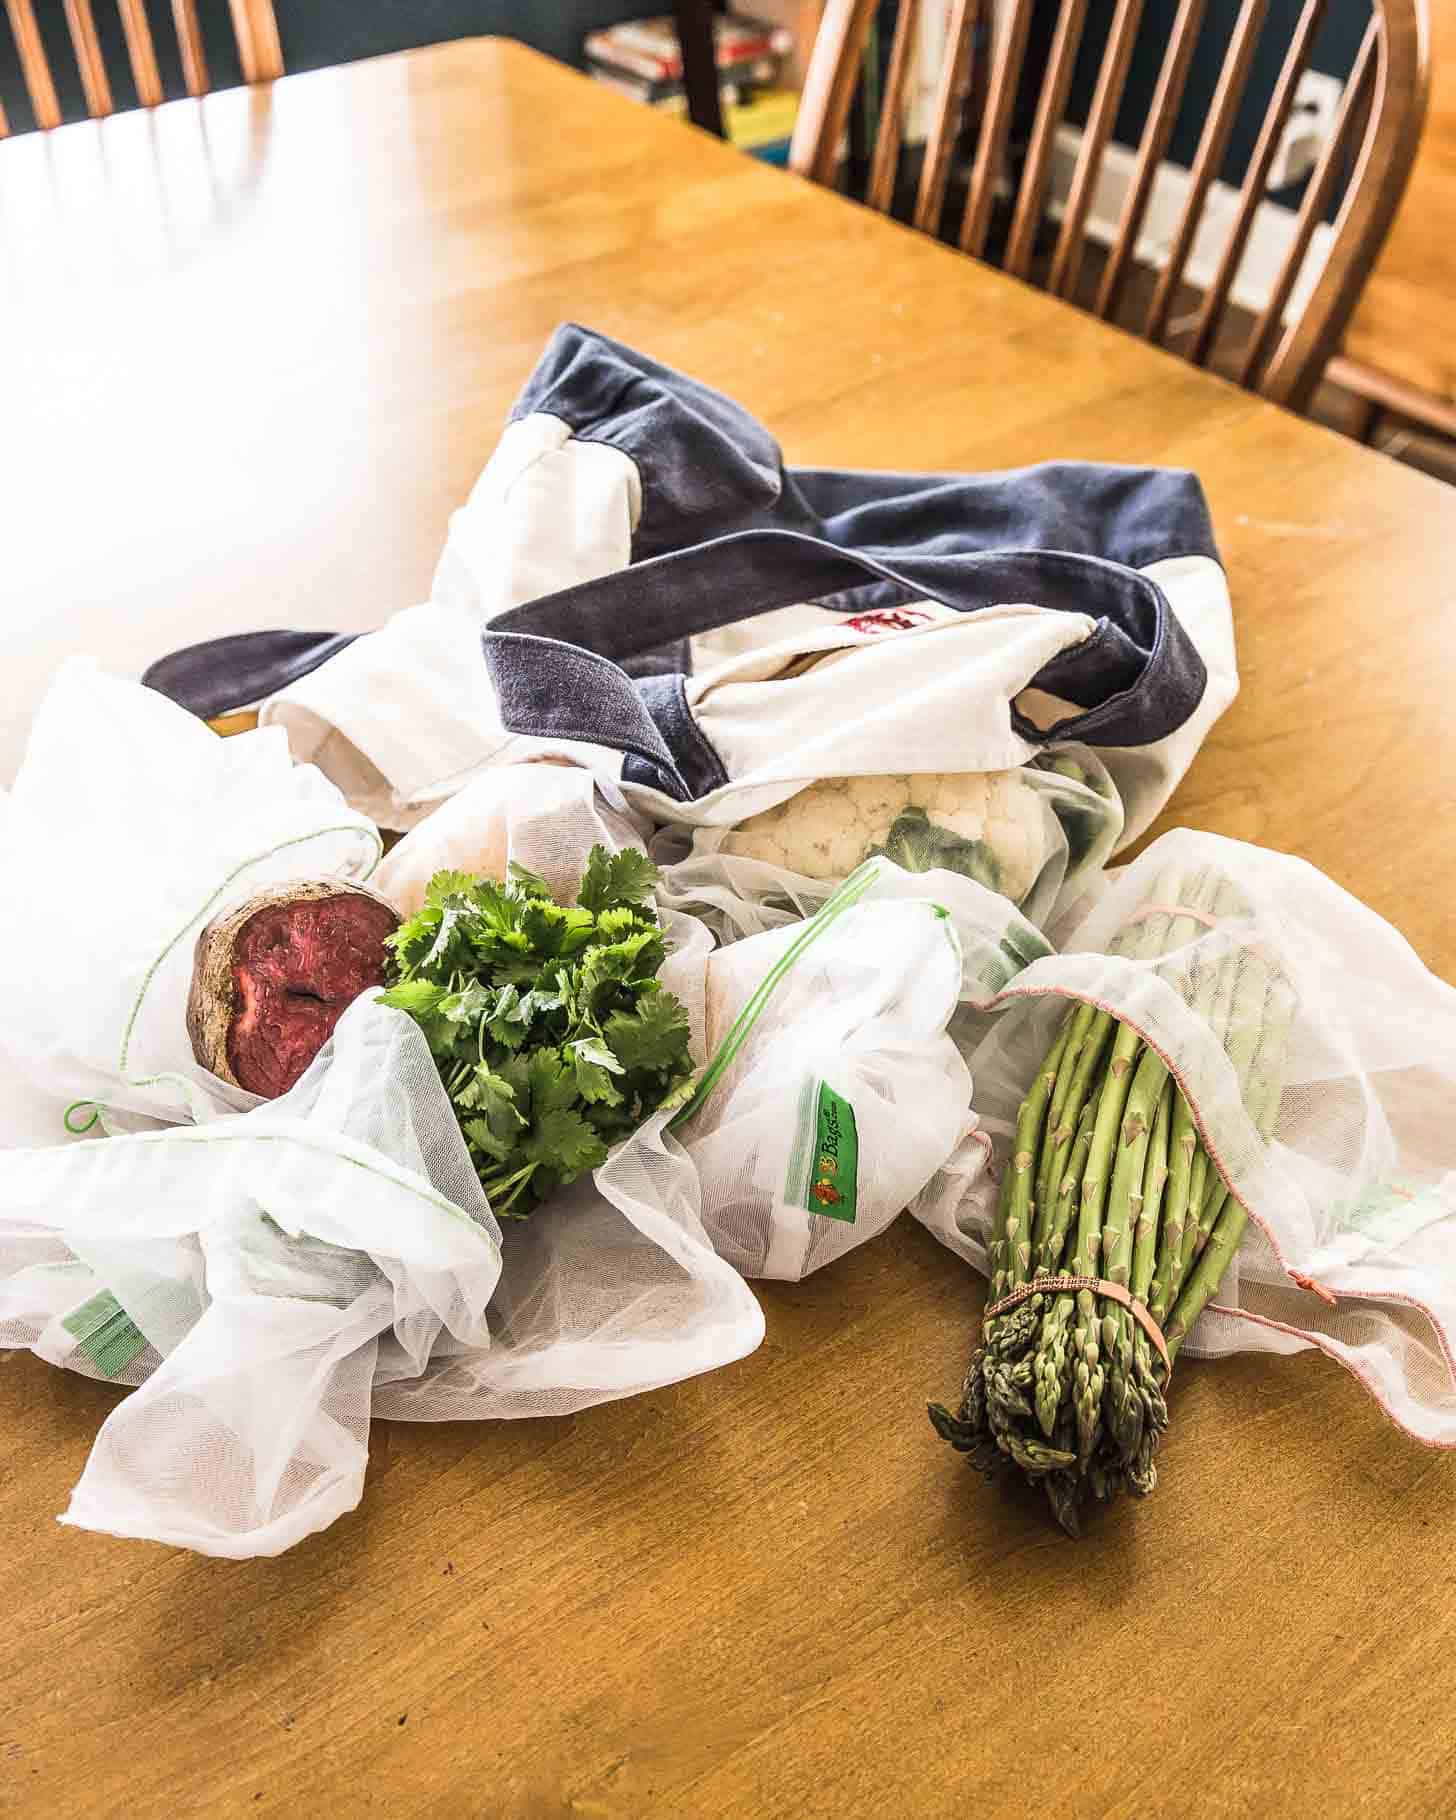 using cloth and mesh bags as a way to reduce kitchen waste